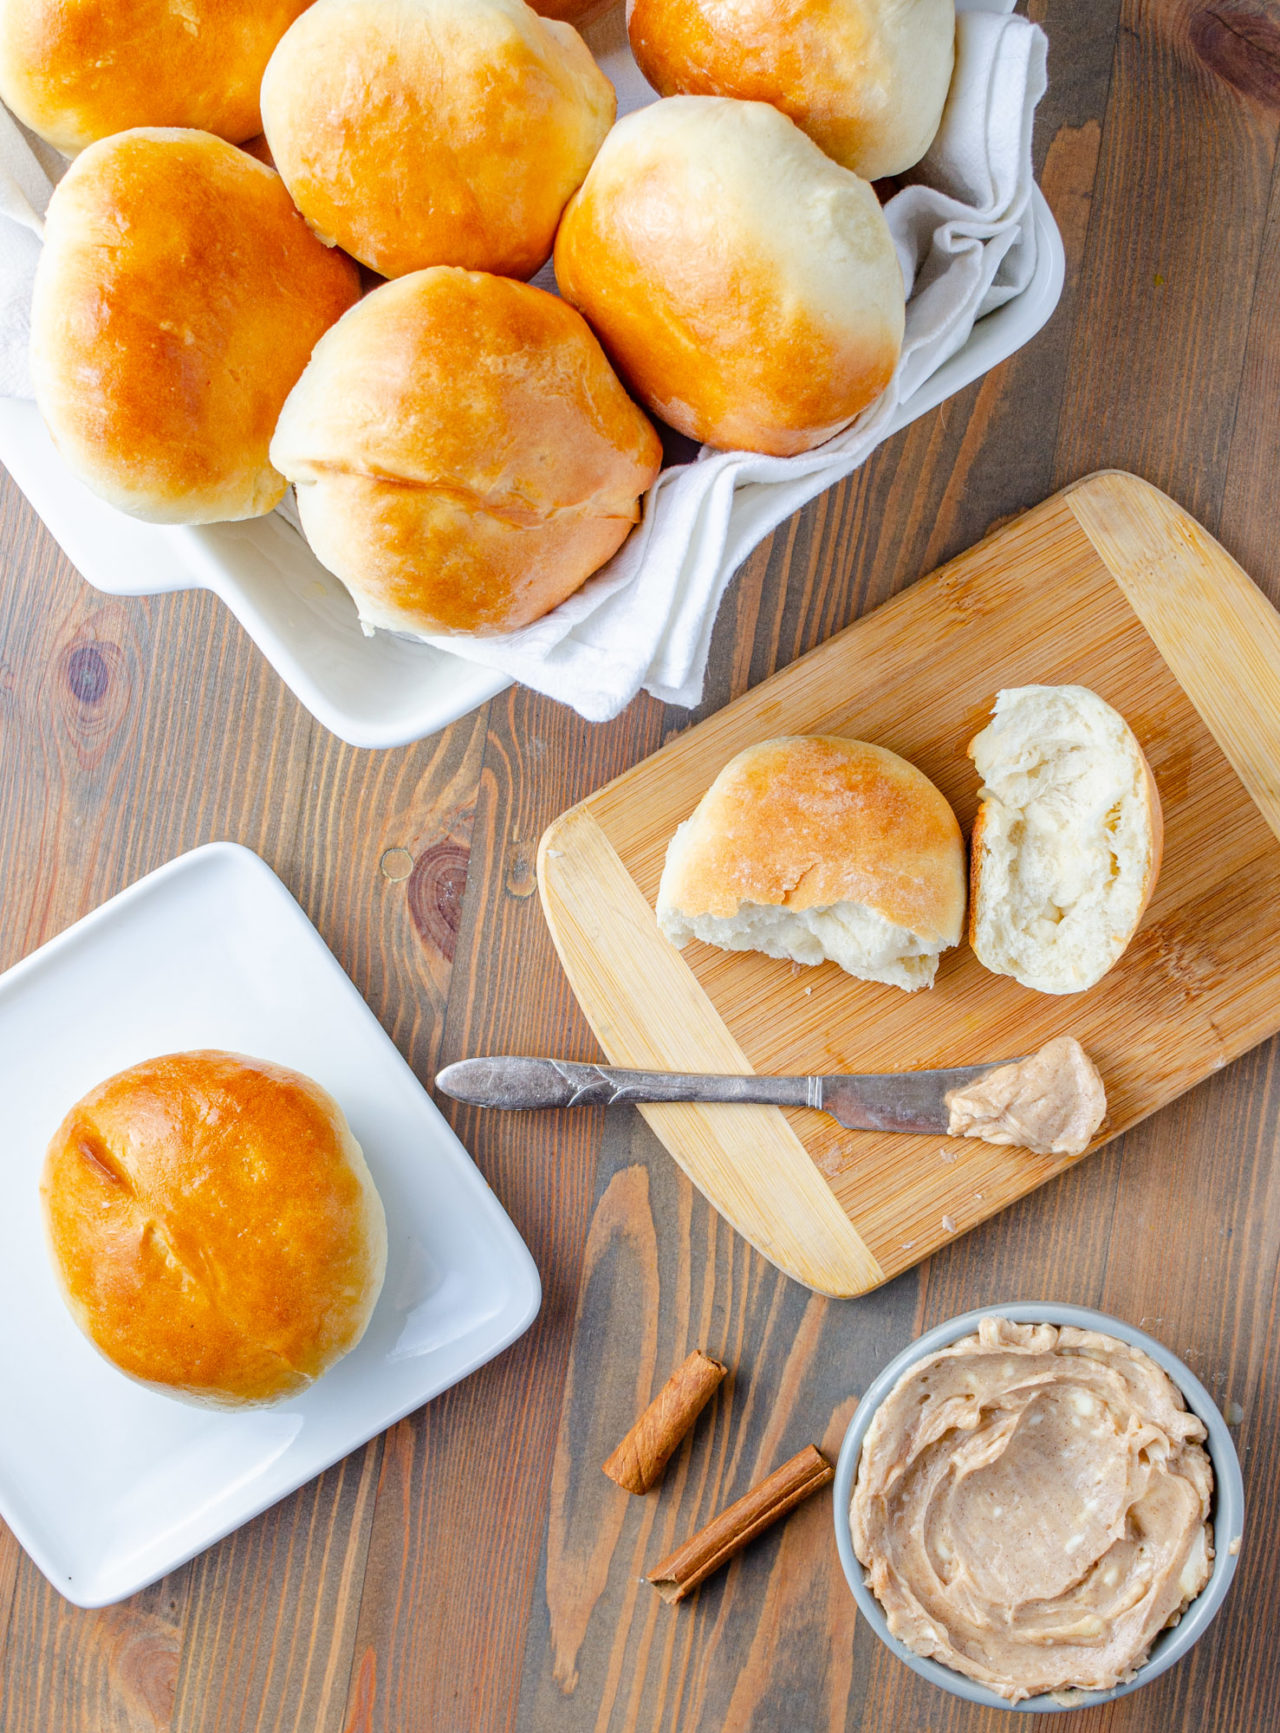 Homemade rolls with cinnamon butter